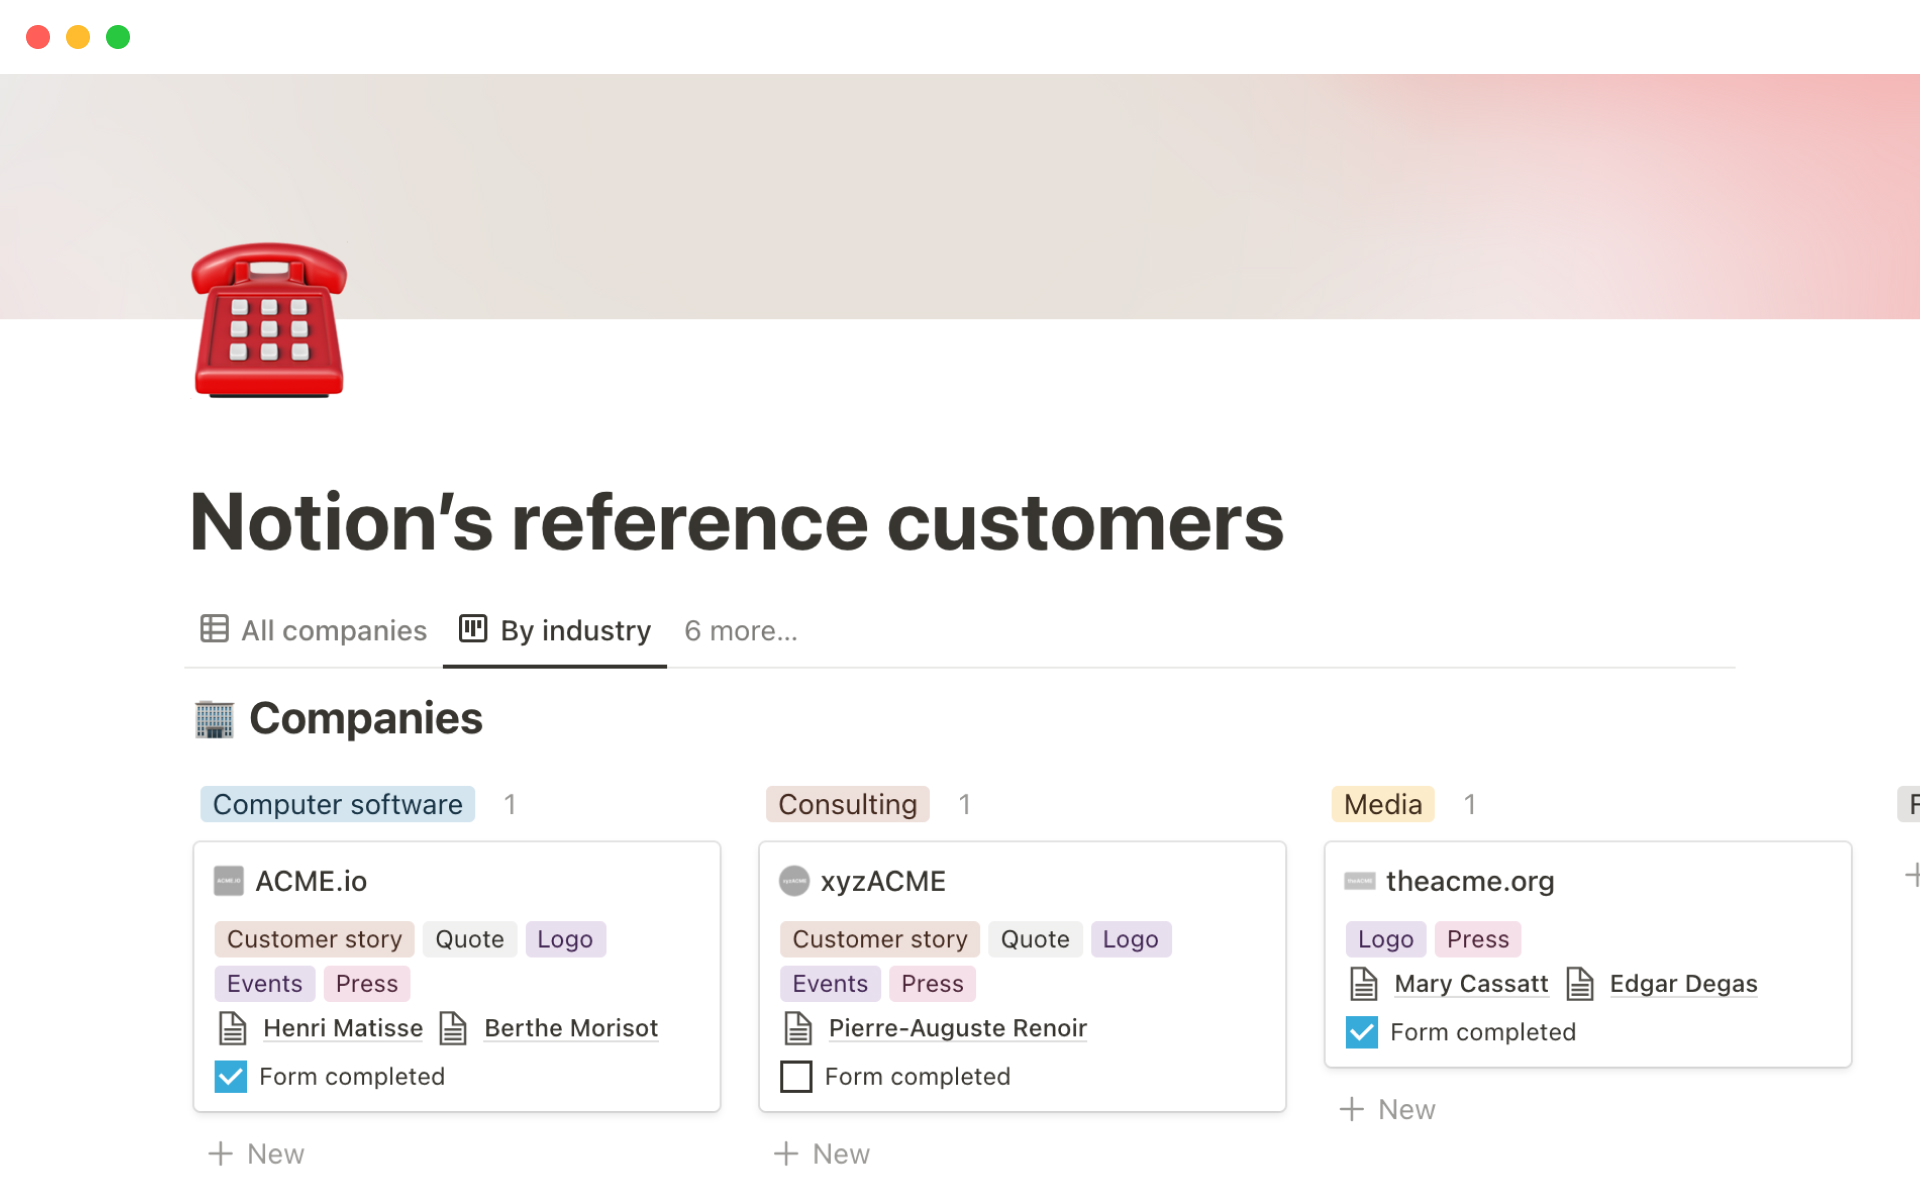 Keep up with company references and create a customer knowledge base.